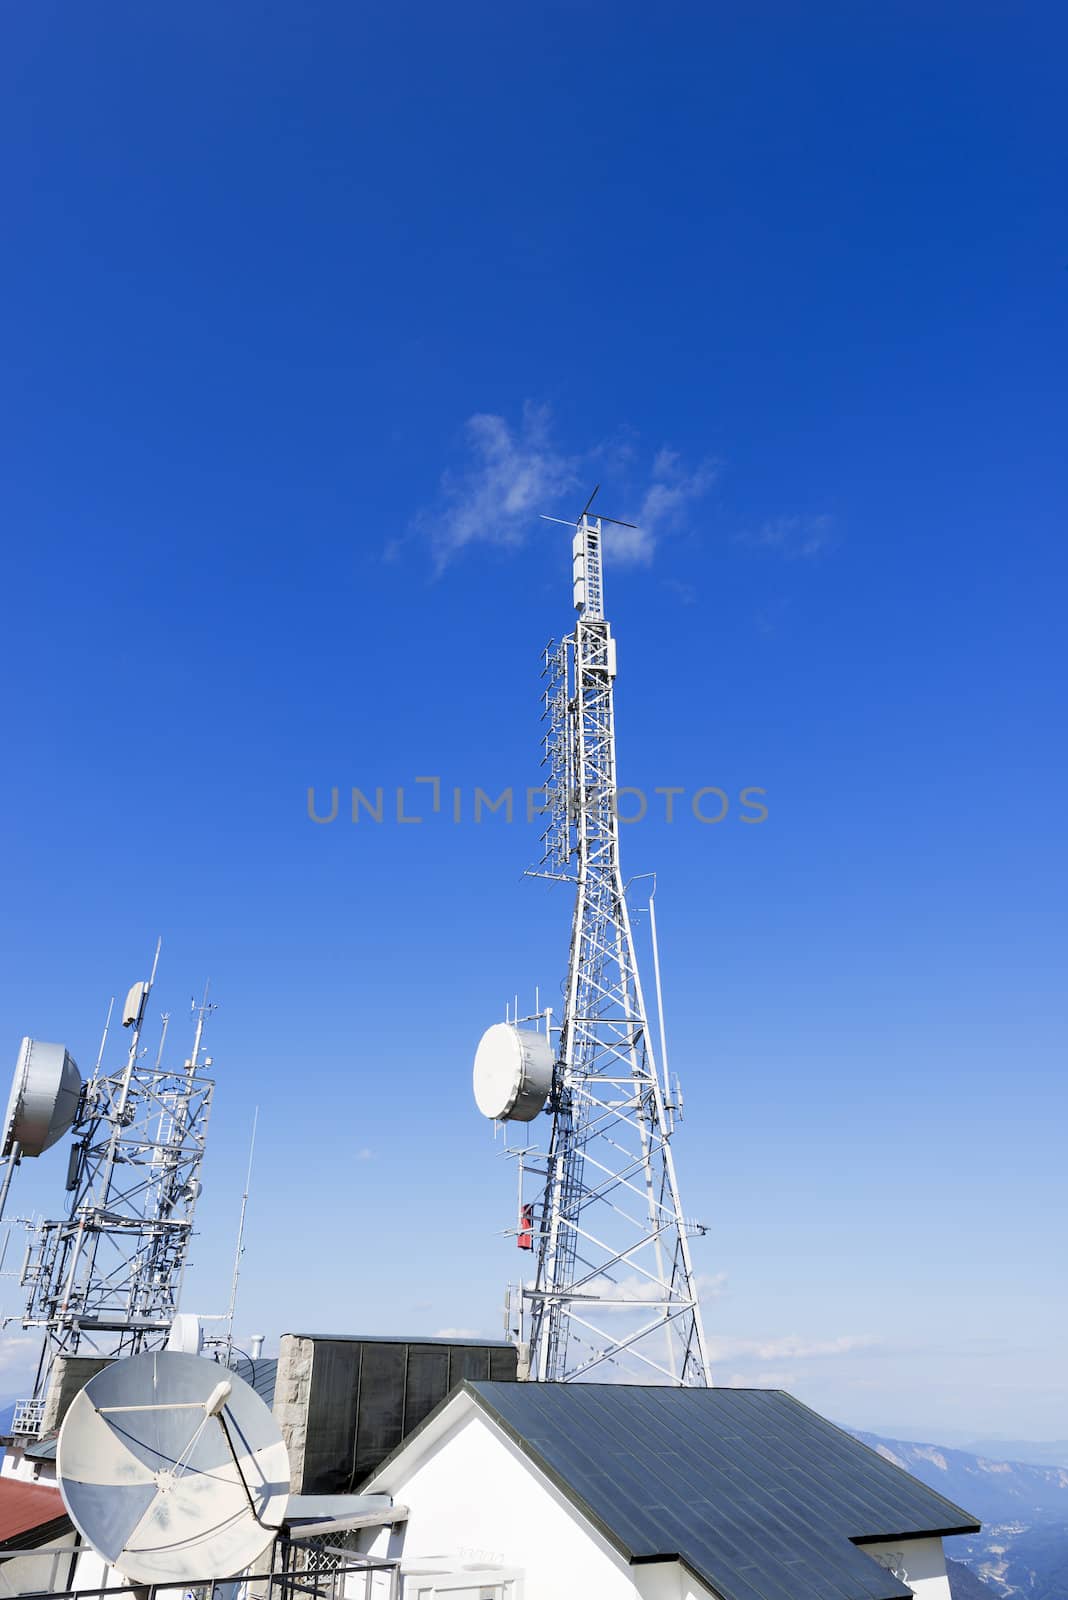 Two communication towers on the roof with a beautiful blue sky